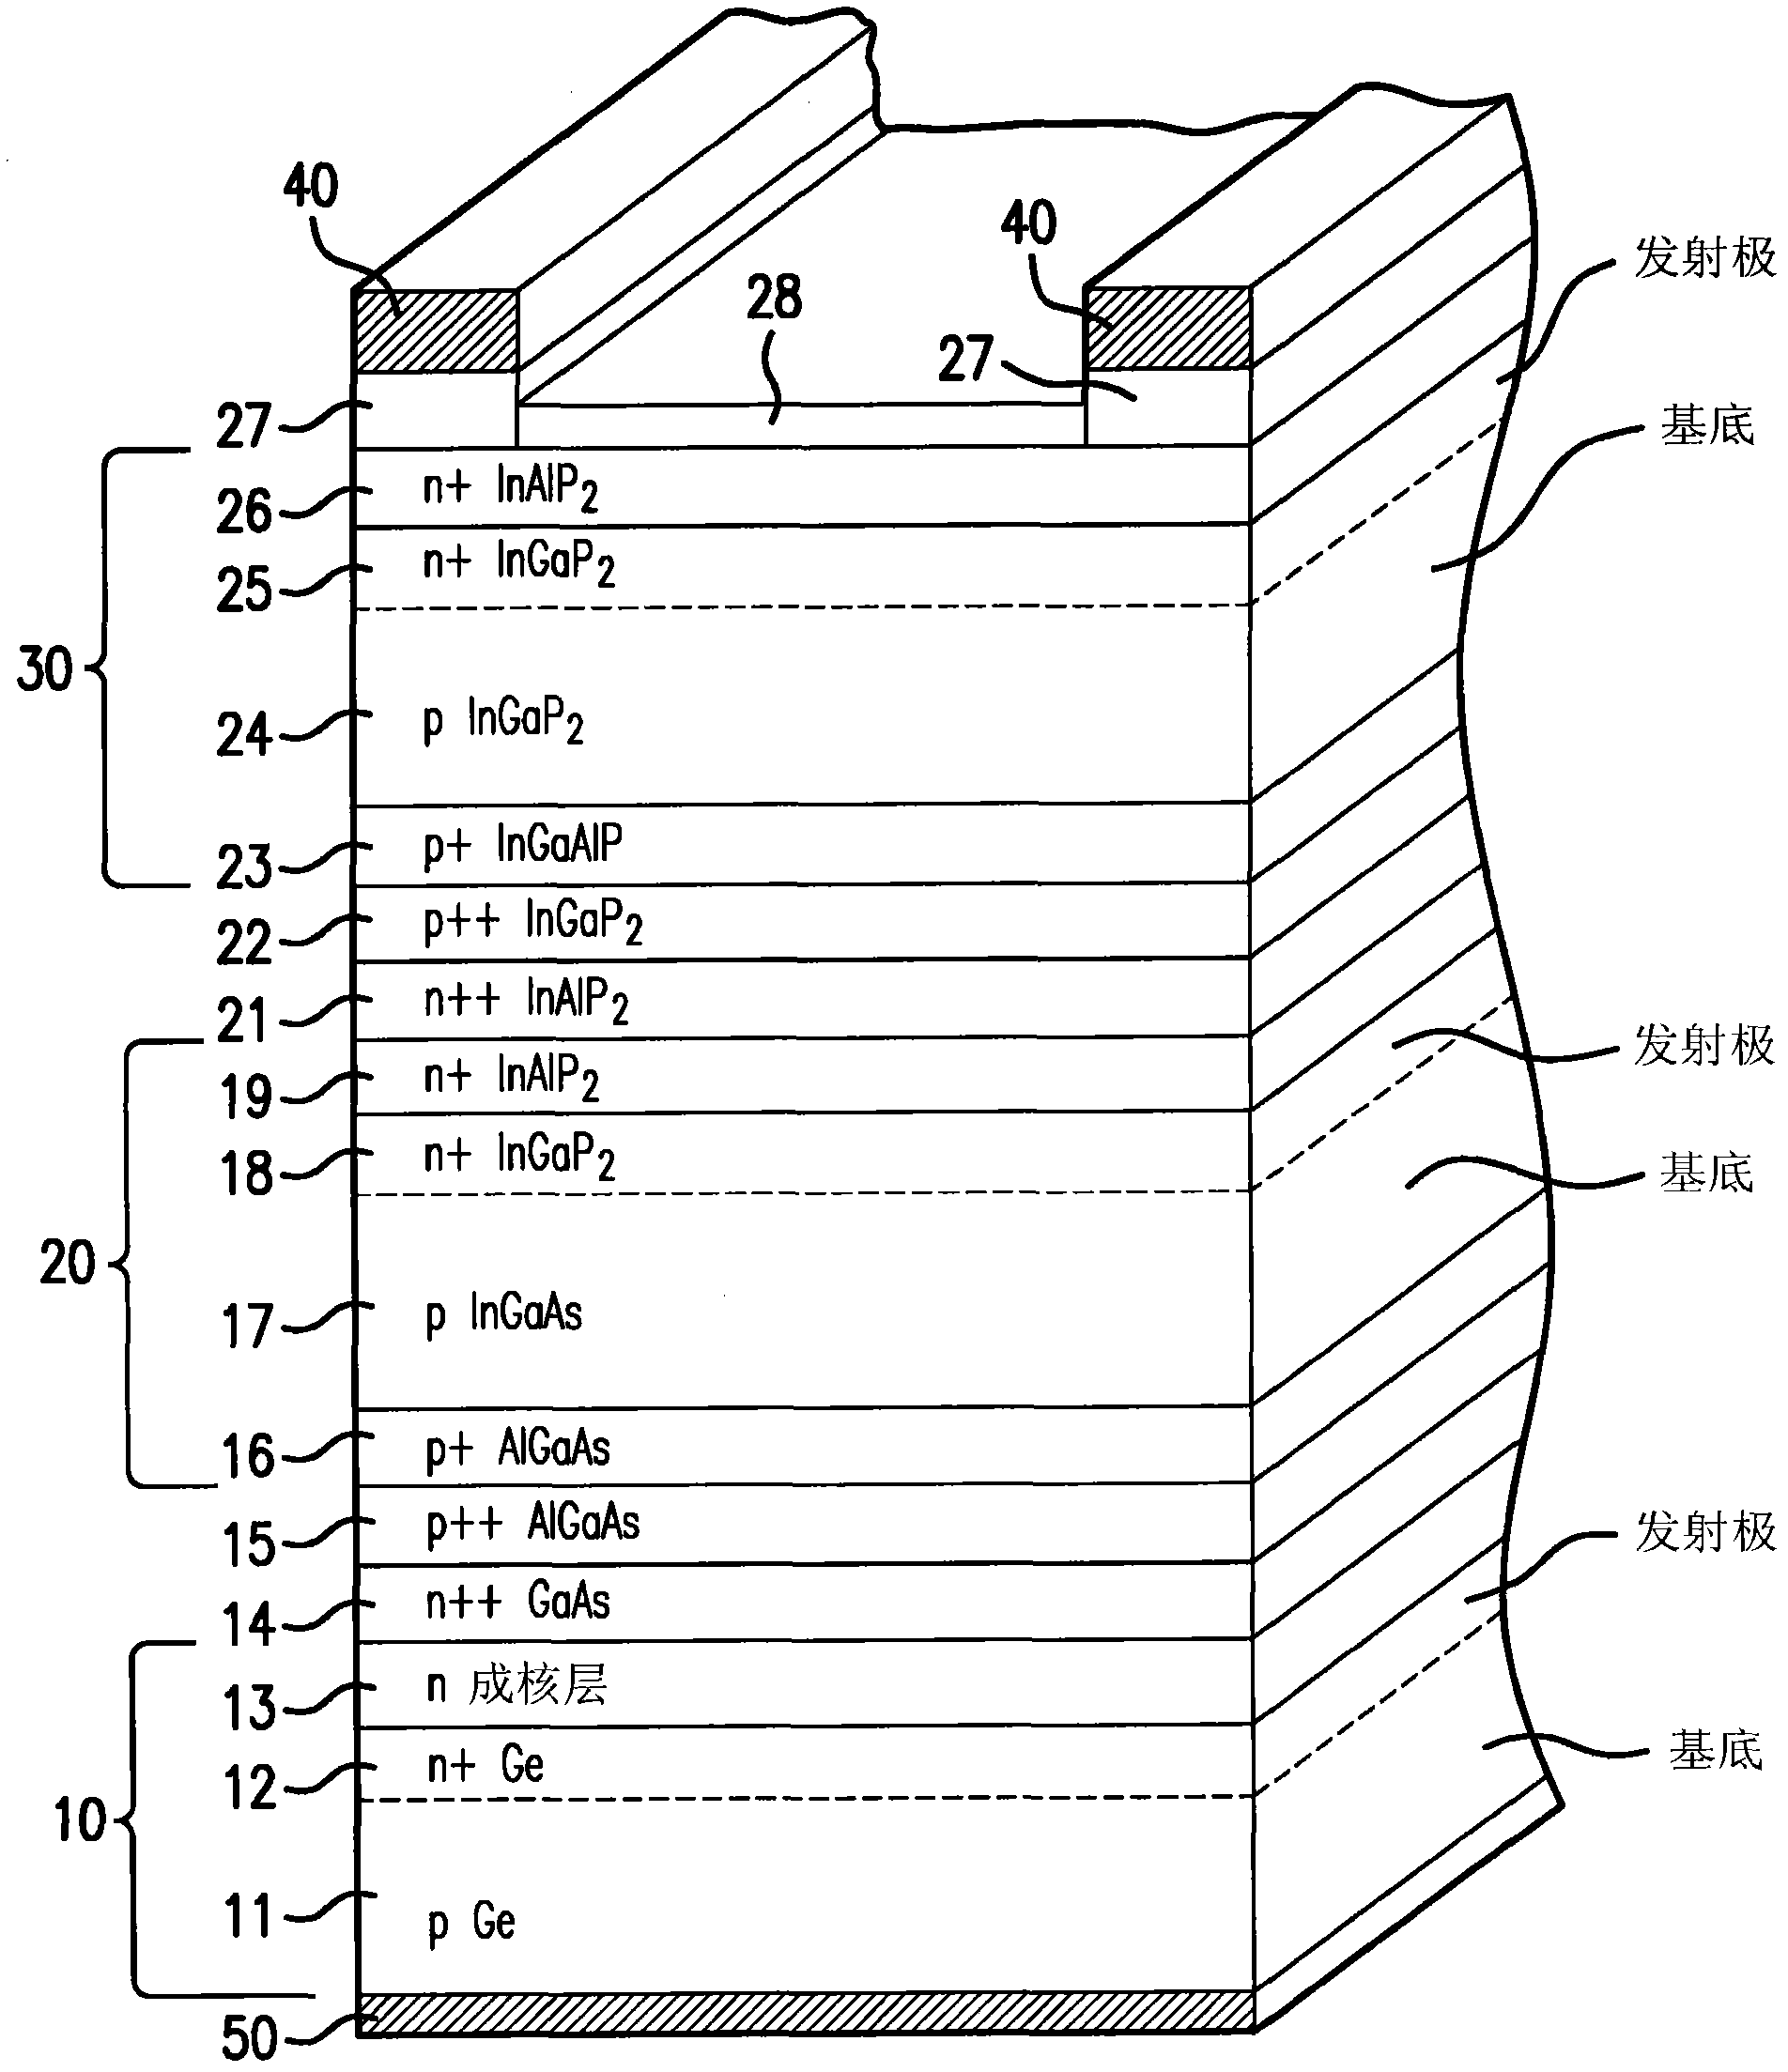 Grid design used for III-V compound semiconductor cell